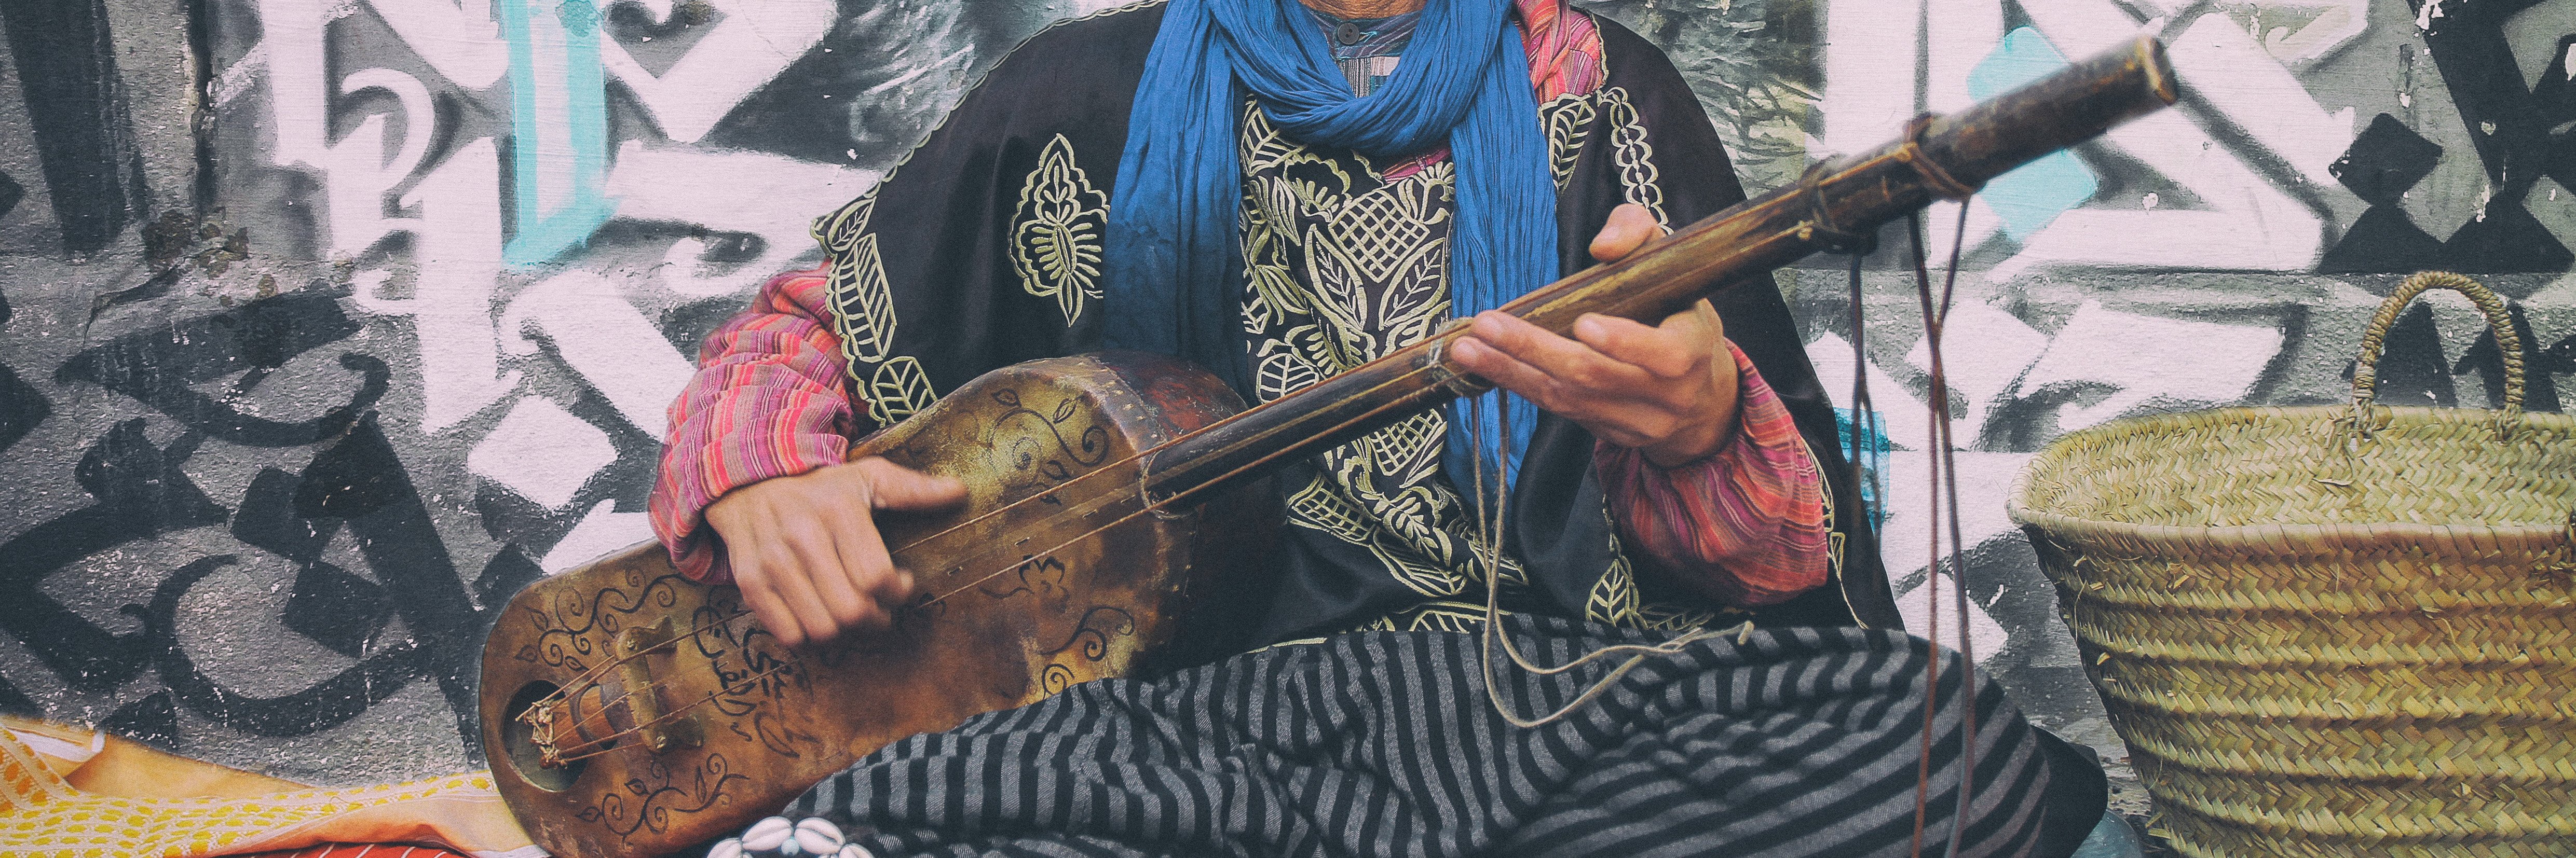 person playing a stringed musical instrument in Asilah, Morocco